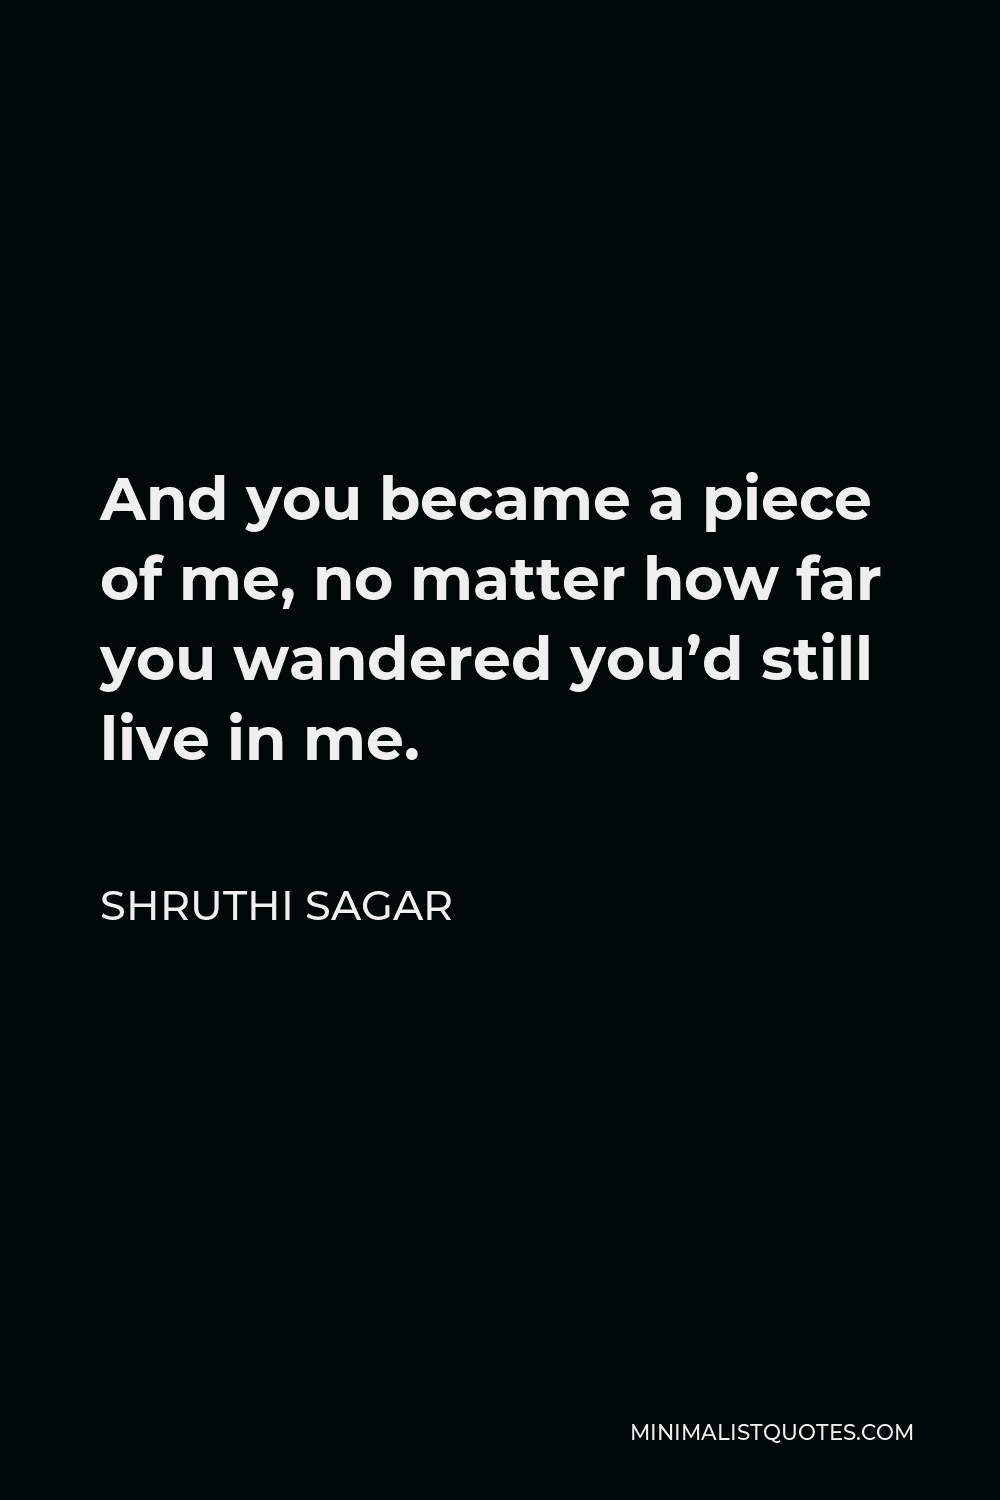 Shruthi Sagar Quote - And you became a piece of me, no matter how far you wandered you’d still live in me.